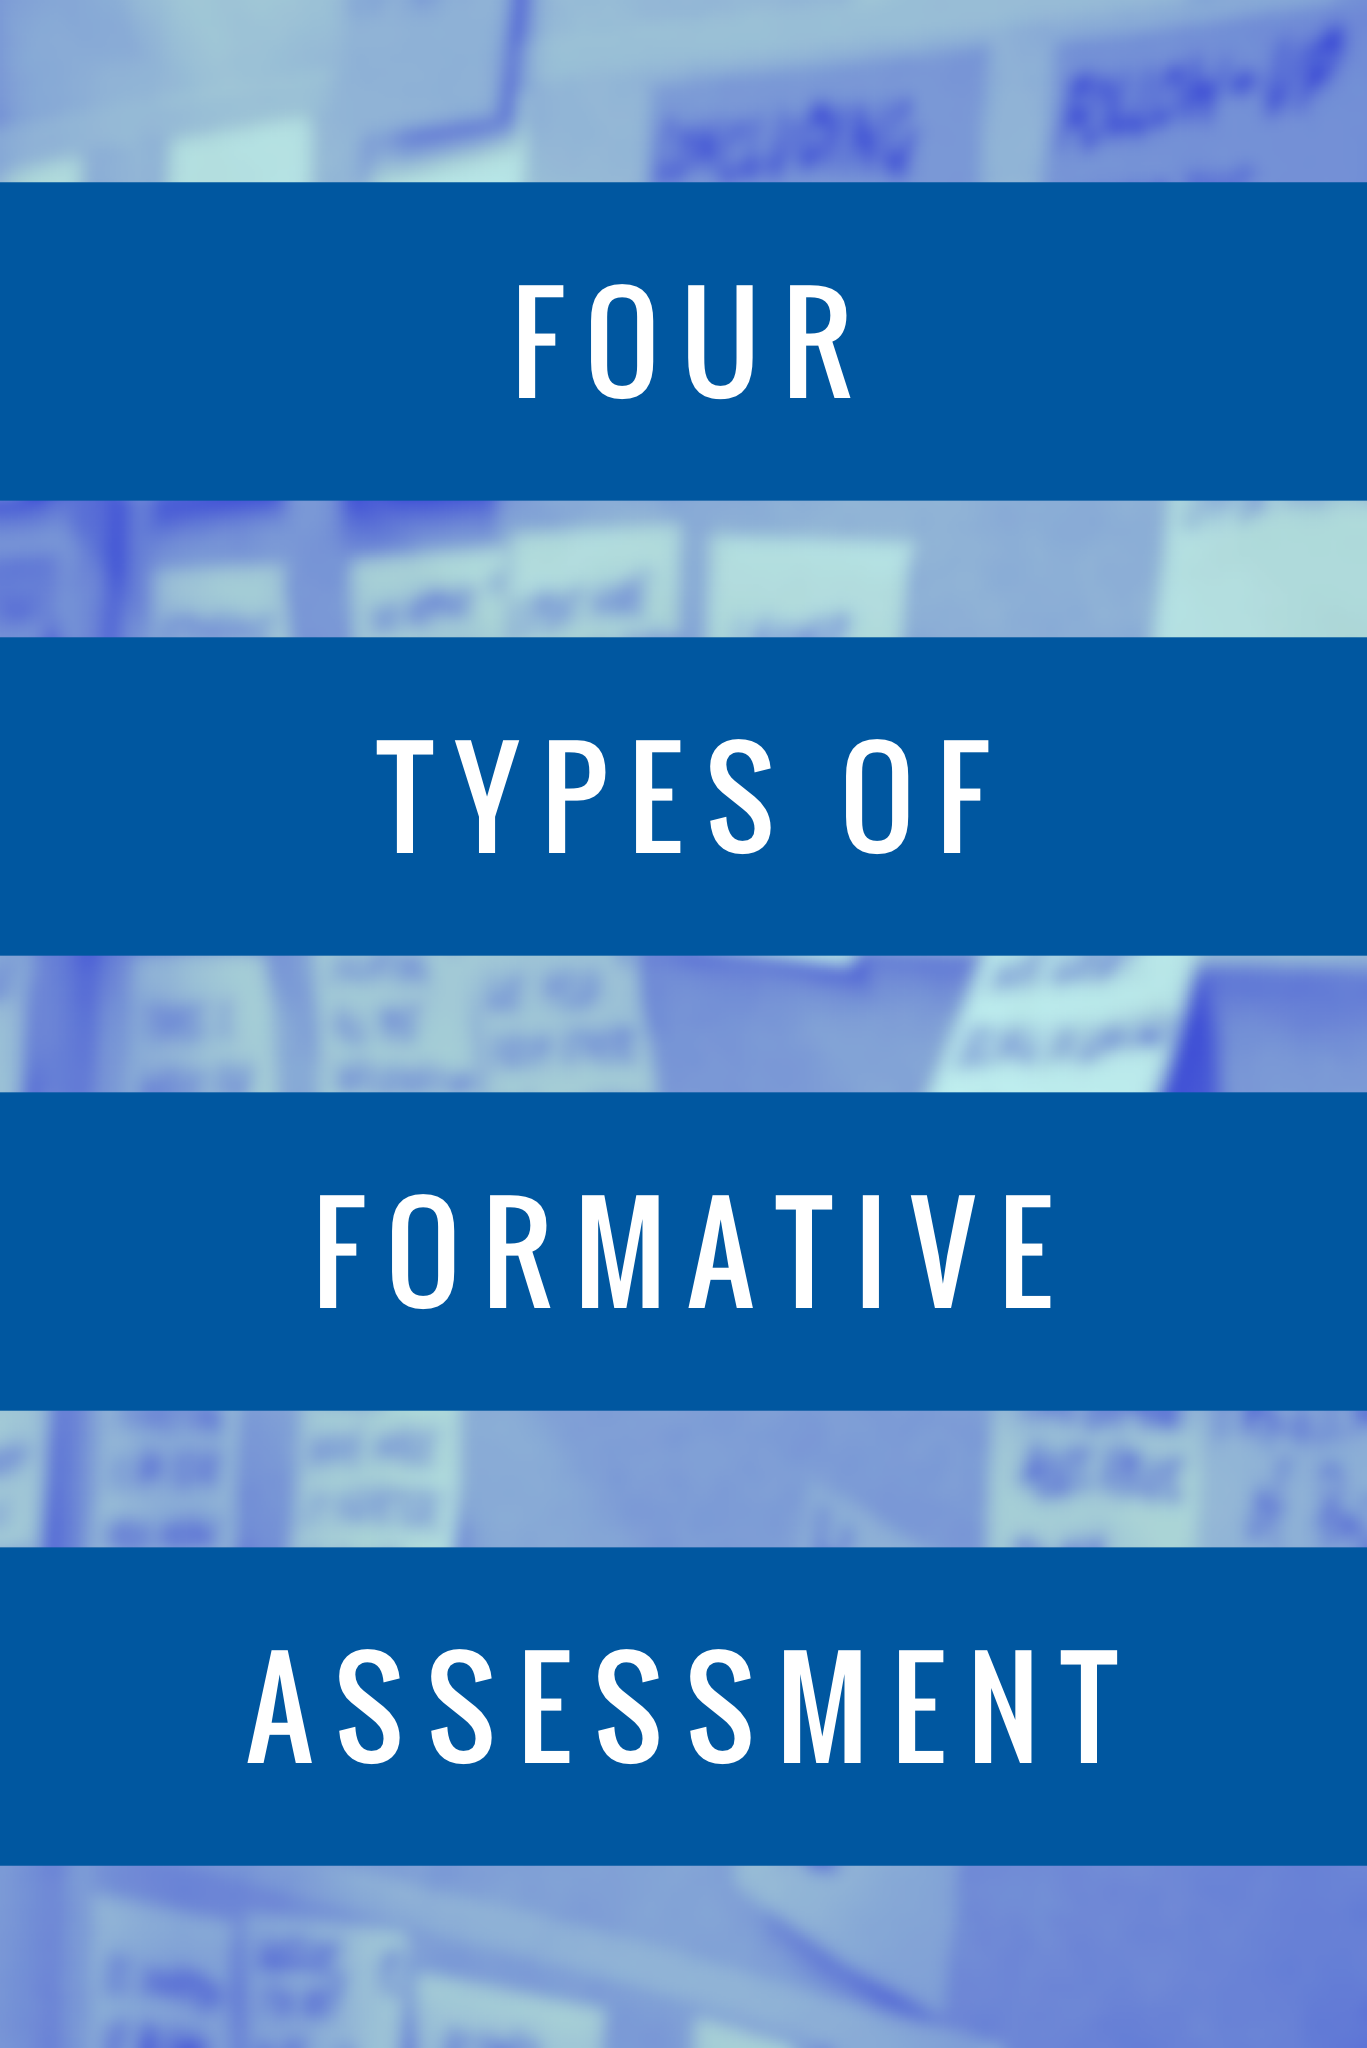 The Four Types of Formative Assessment